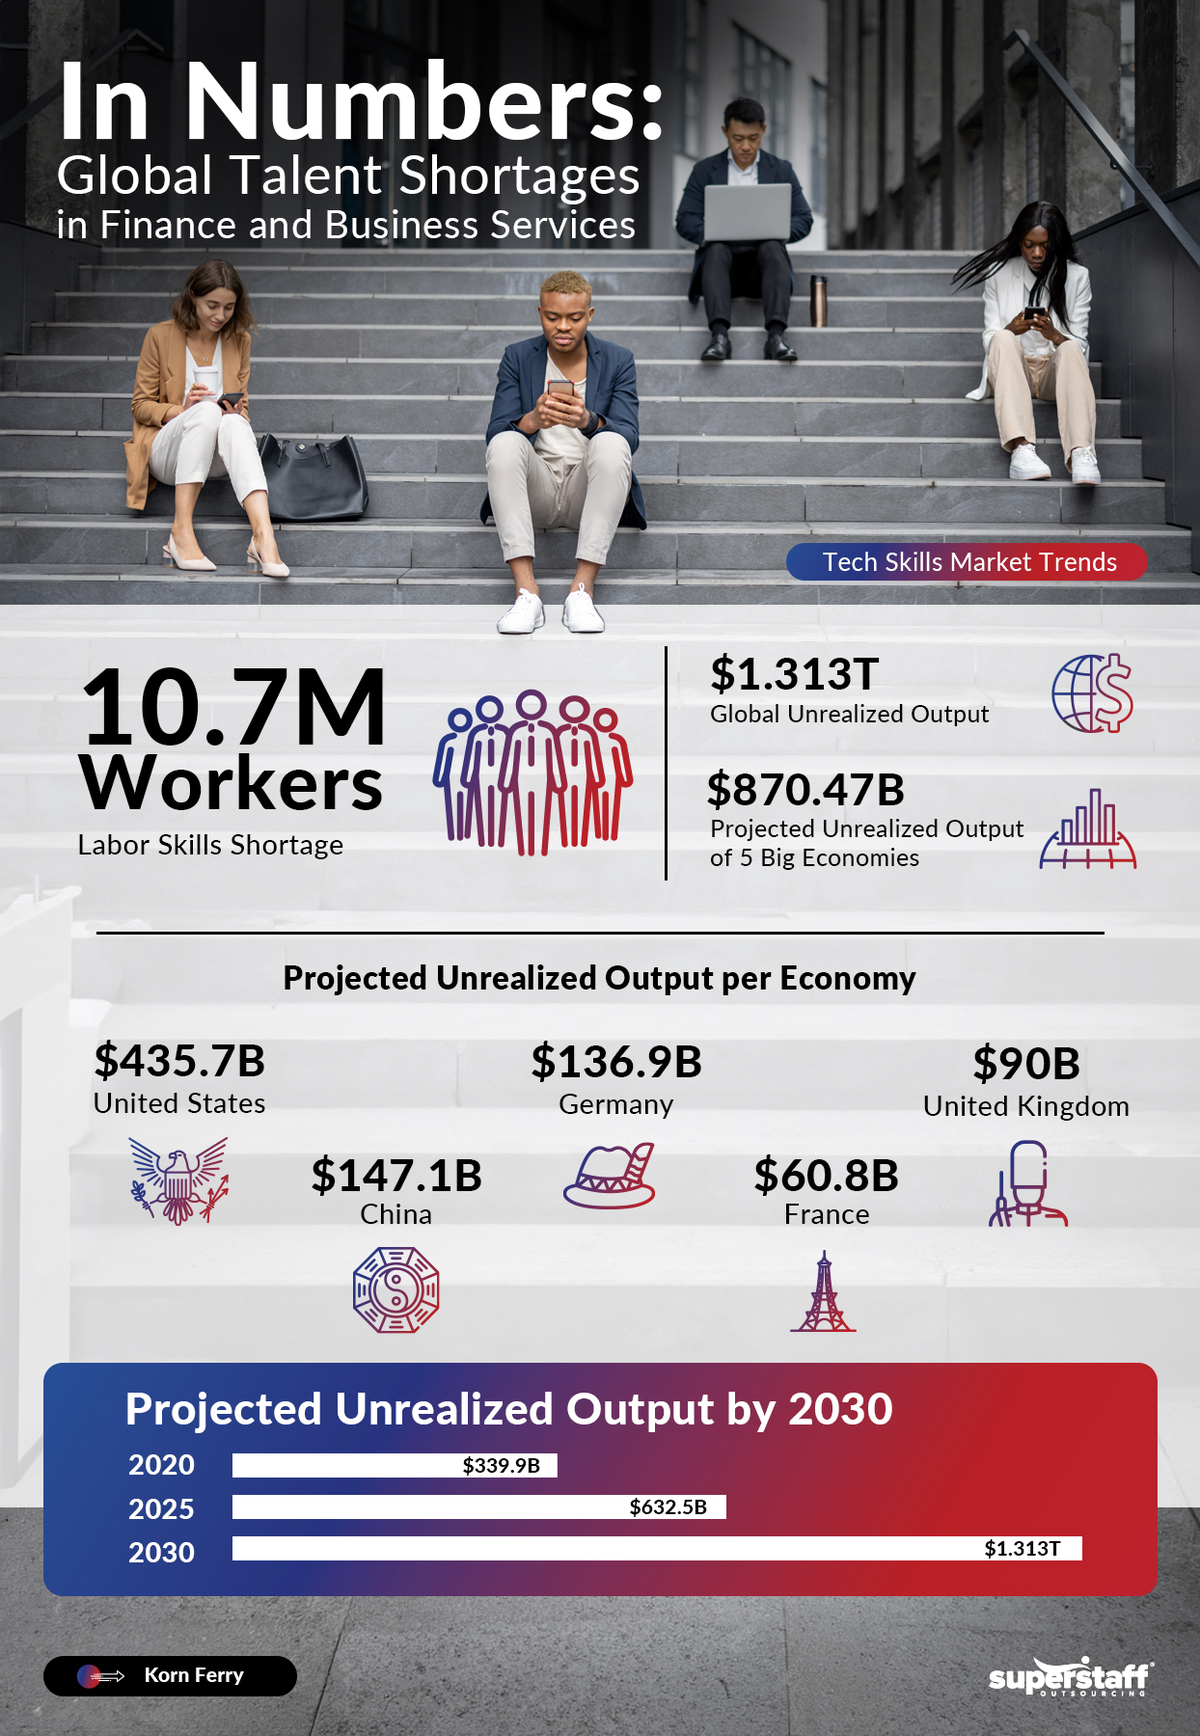 Young professionals sit by the steps. Image caption reads: The-Potential-Cost-of-Today_s-Talent-Shortage-by-2030.